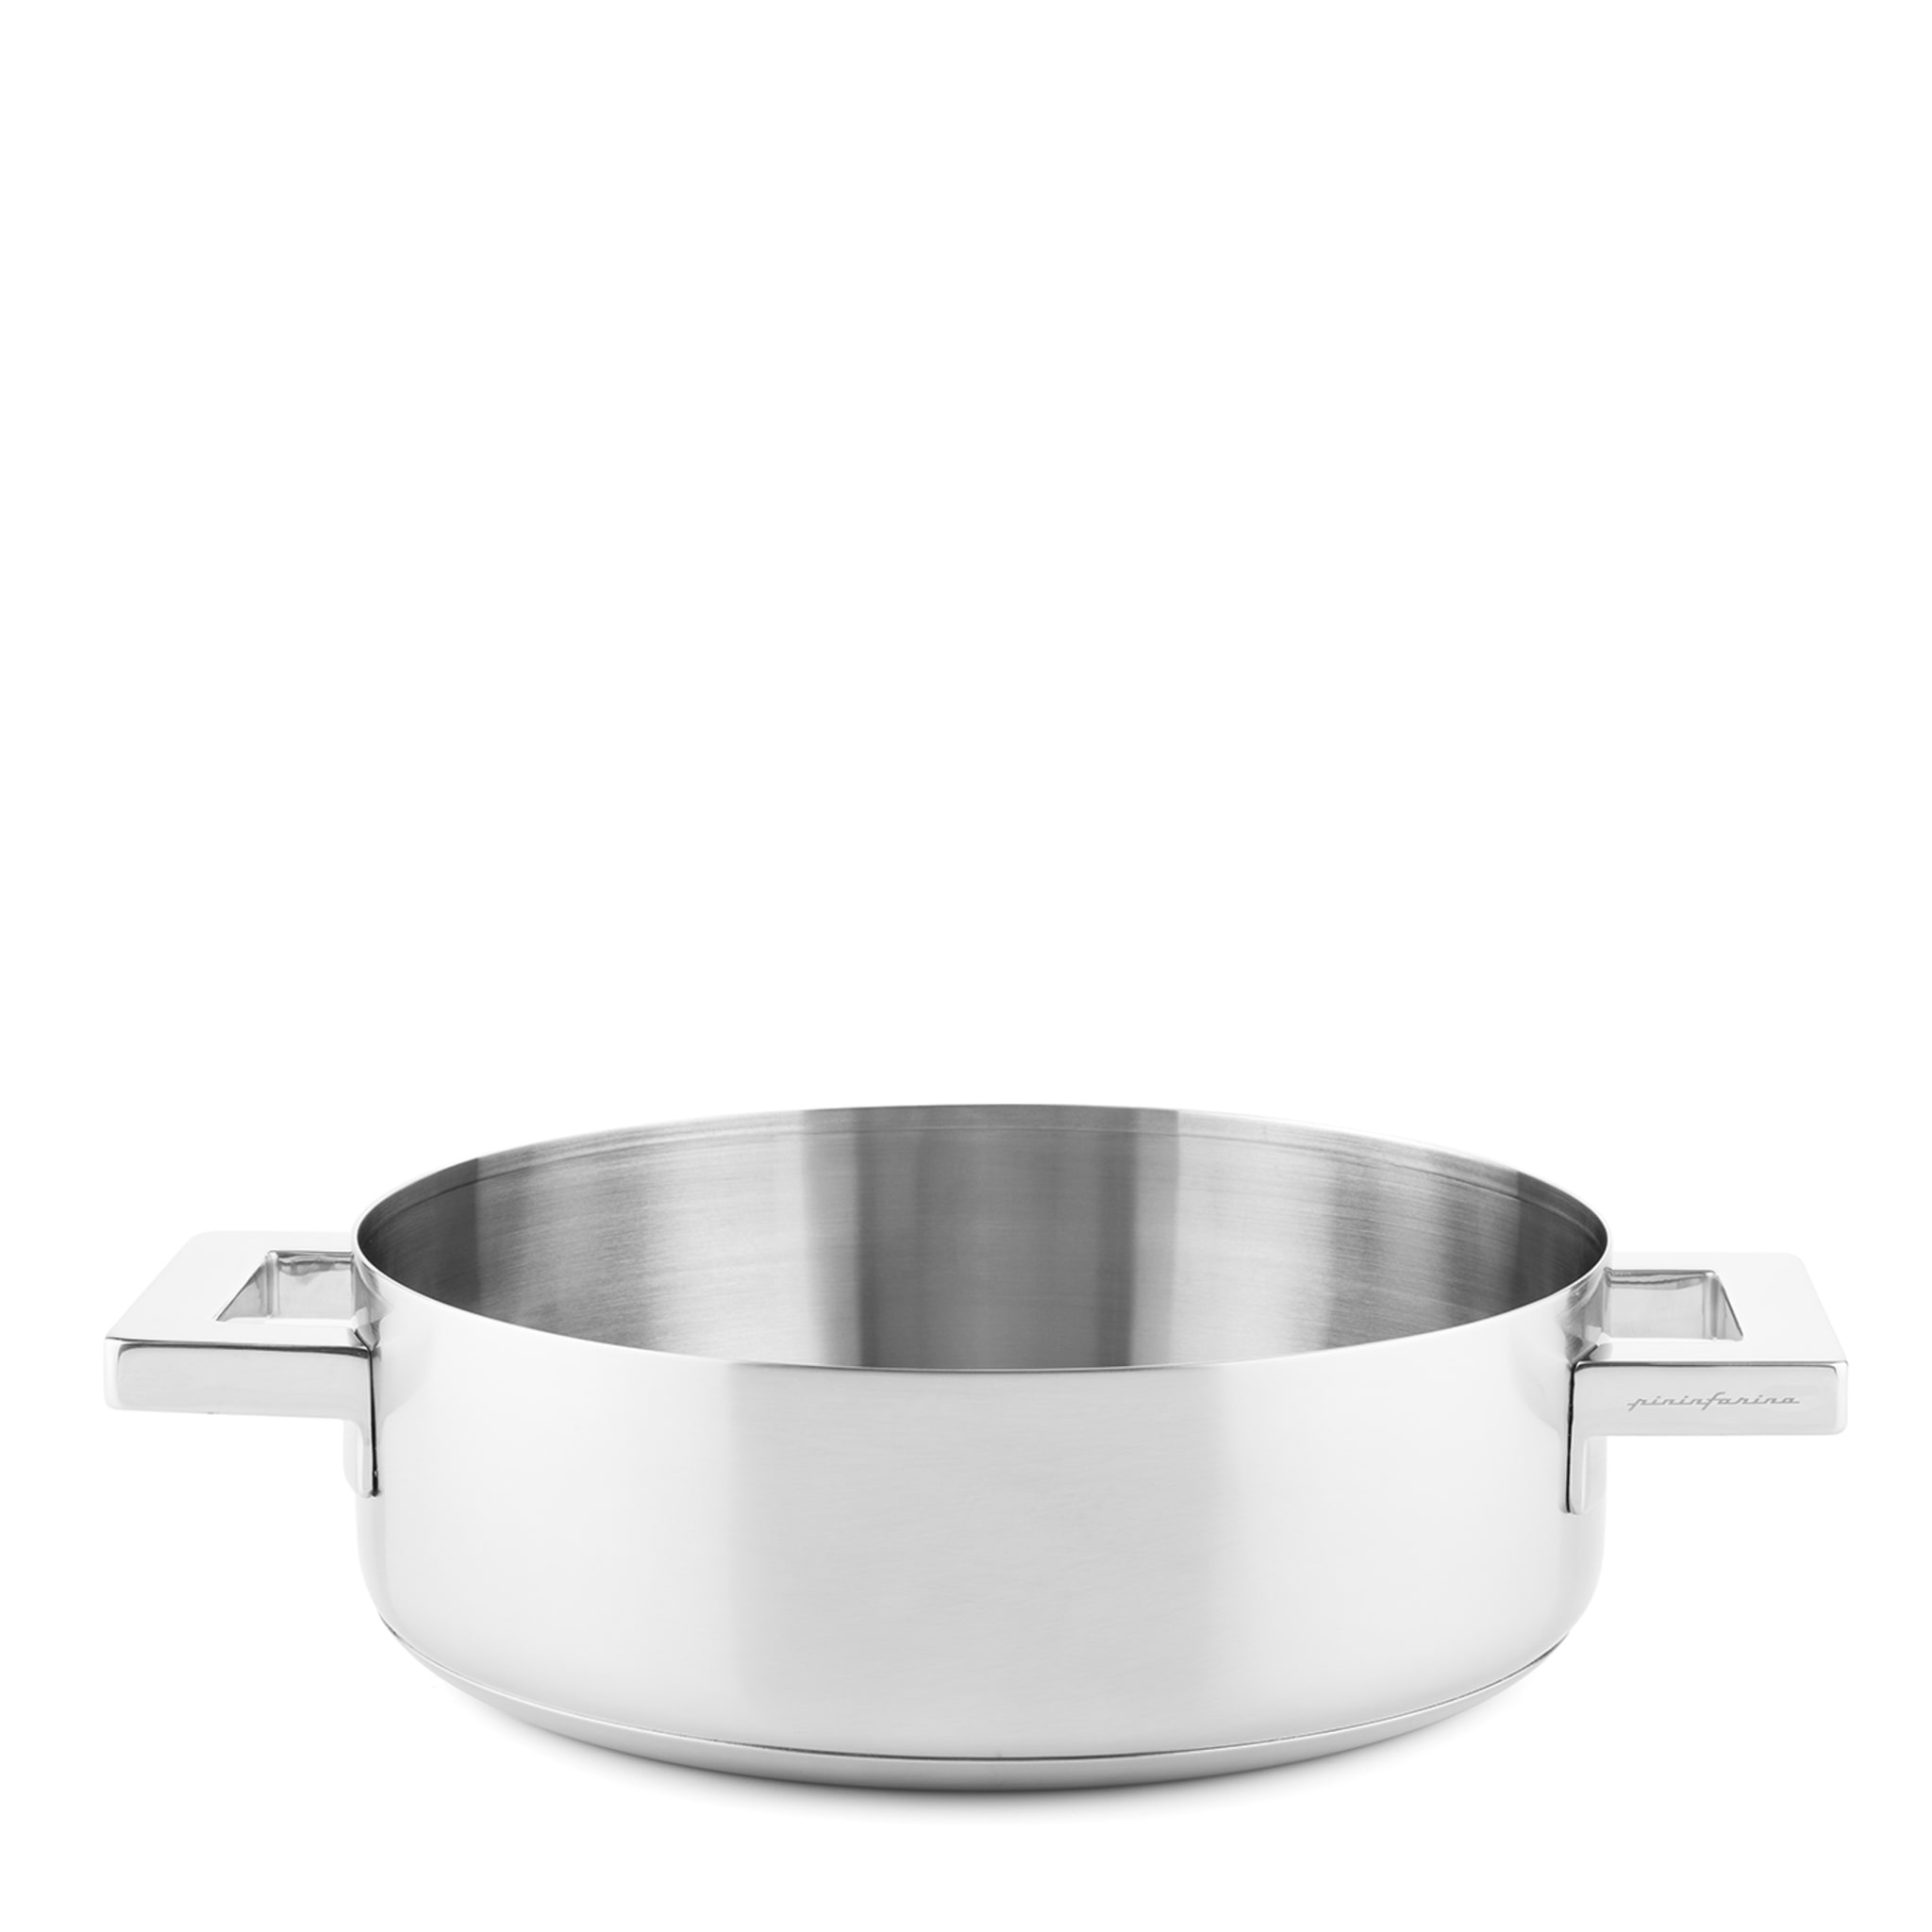 Stile 24cm Frying Pan with 2 Handles with lid - Alternative view 3